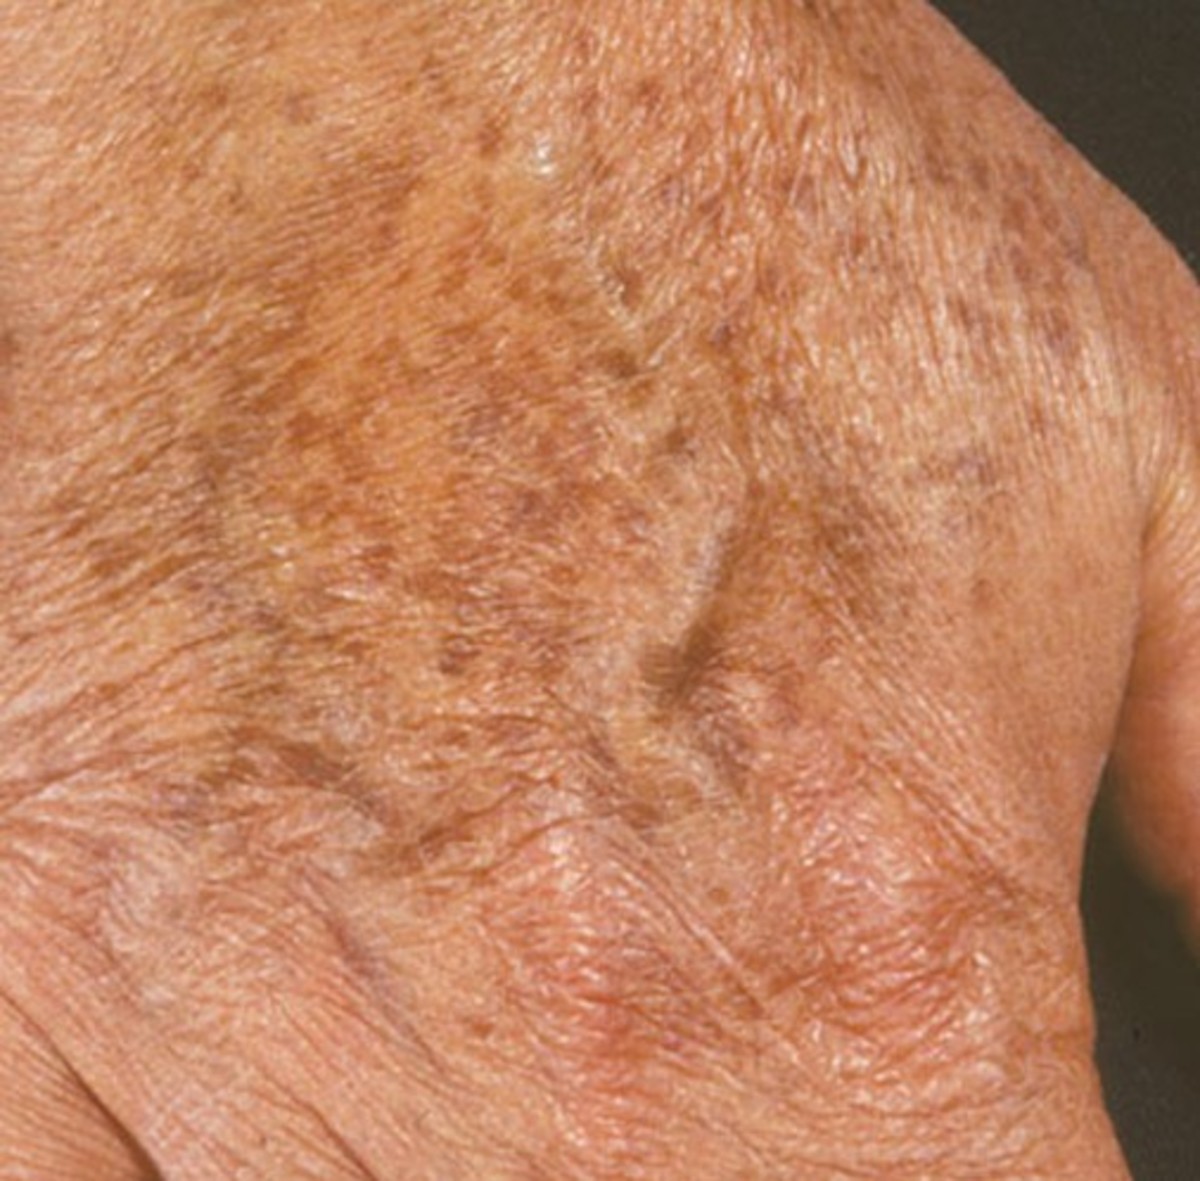 Liver spots on the hand